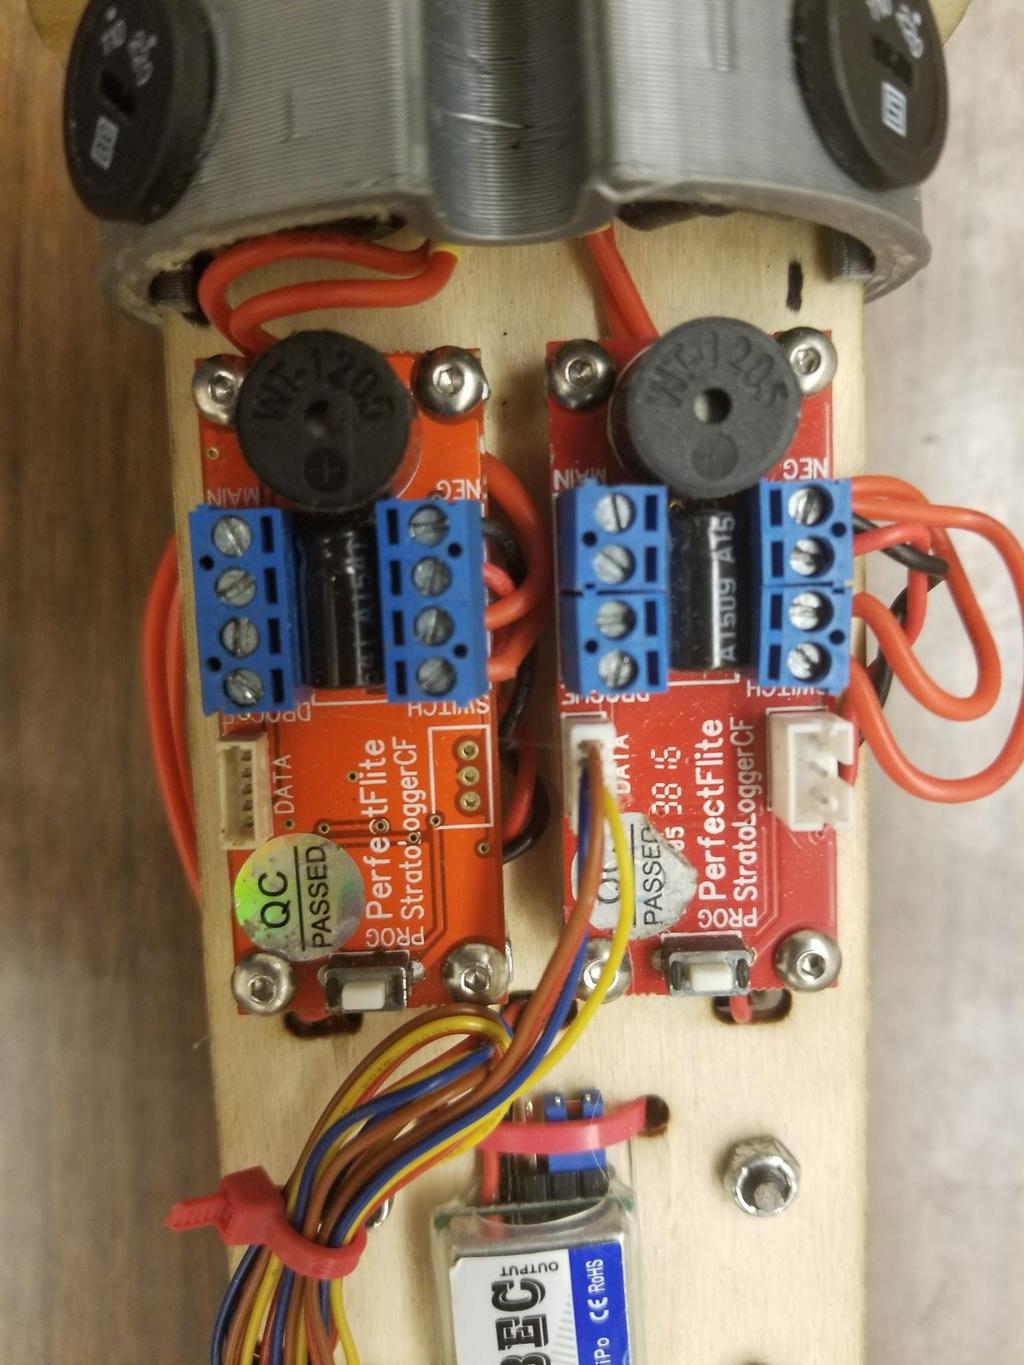 Altimeters Two altimeters will be used for redundancy The four pyro outputs will be wired to two electric matches Max Altitude: